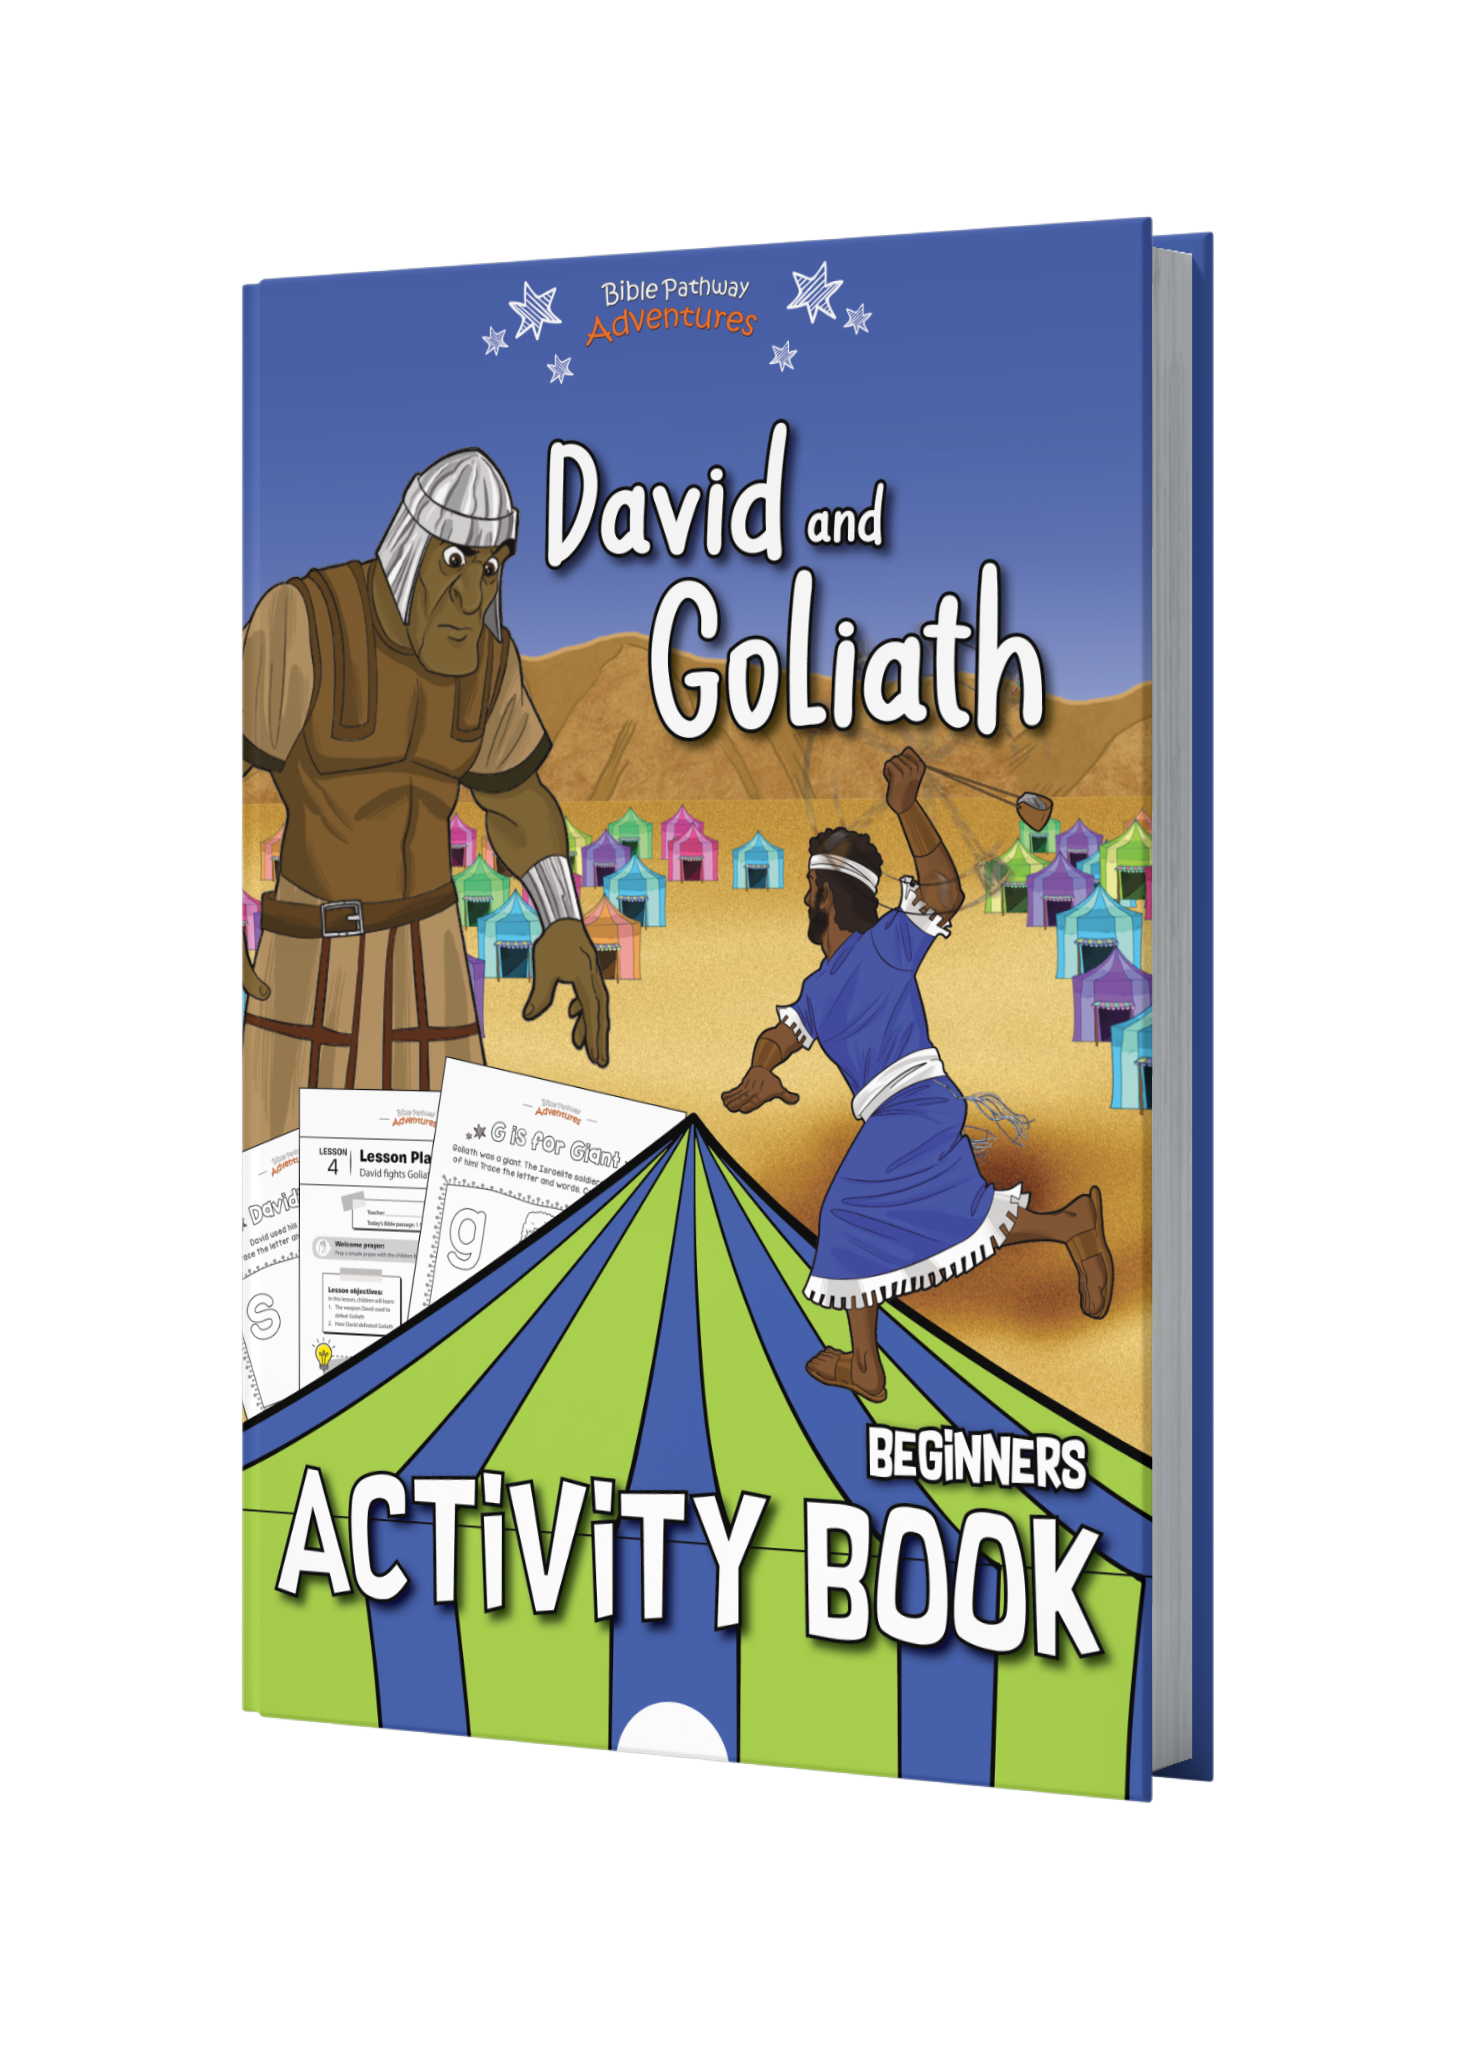 David and Goliath Activity Book for Beginners book cover